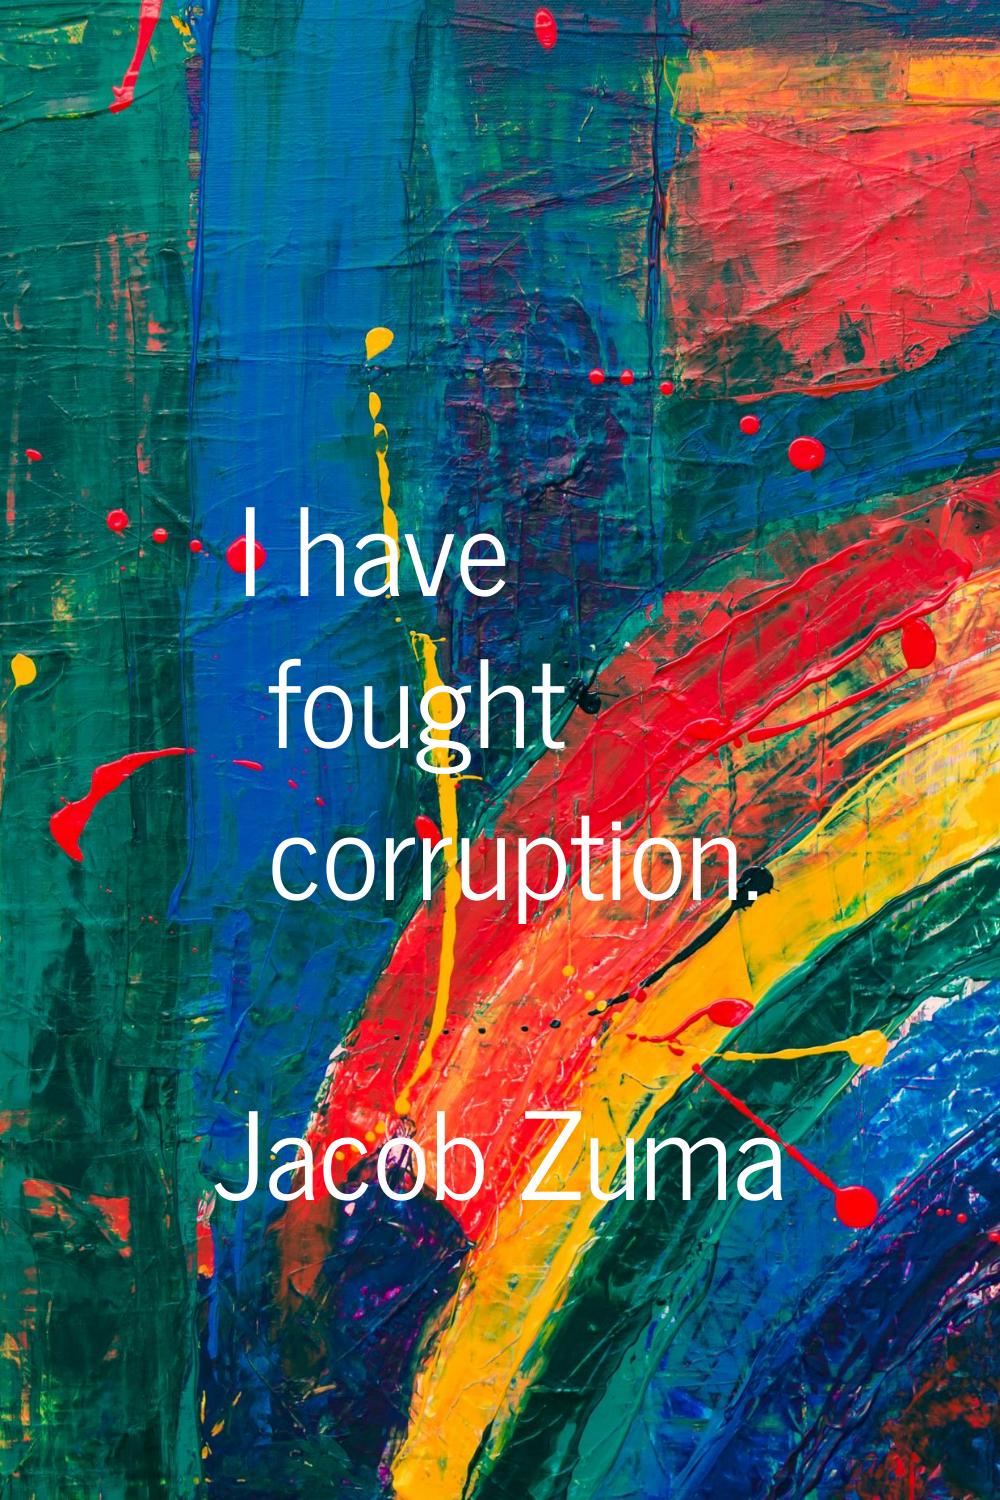 I have fought corruption.